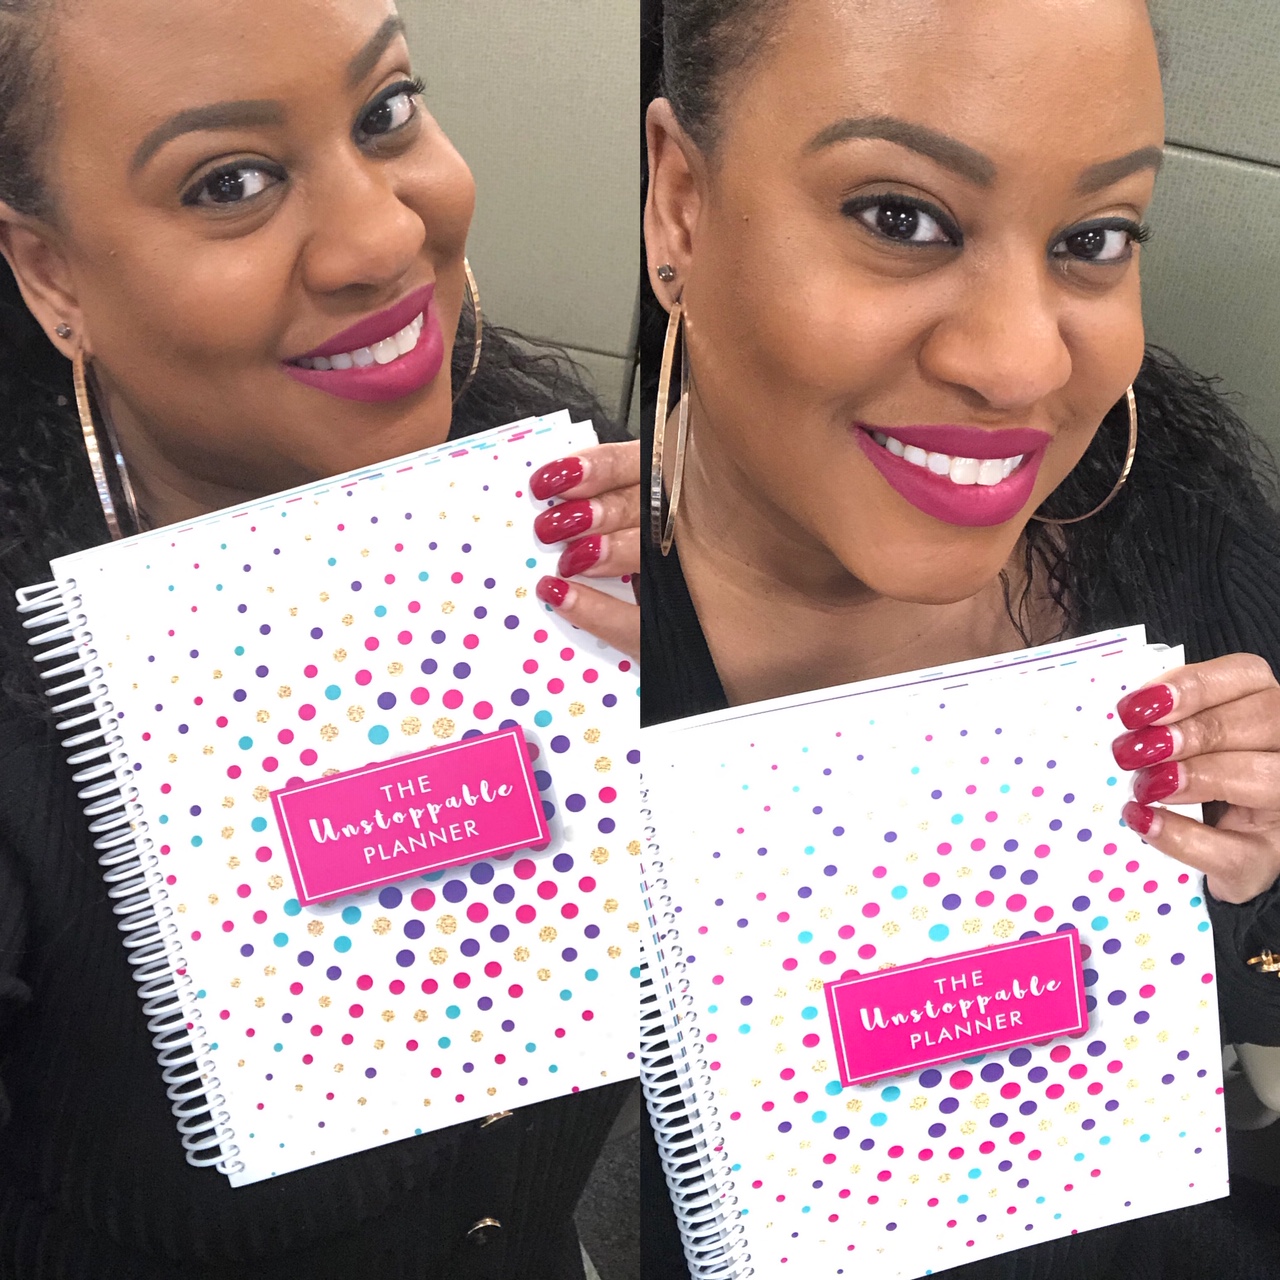 If you are a looking for a tool that inspires you, encourages you, and helps keep you organized, check out my review of The Unstoppable Planner.